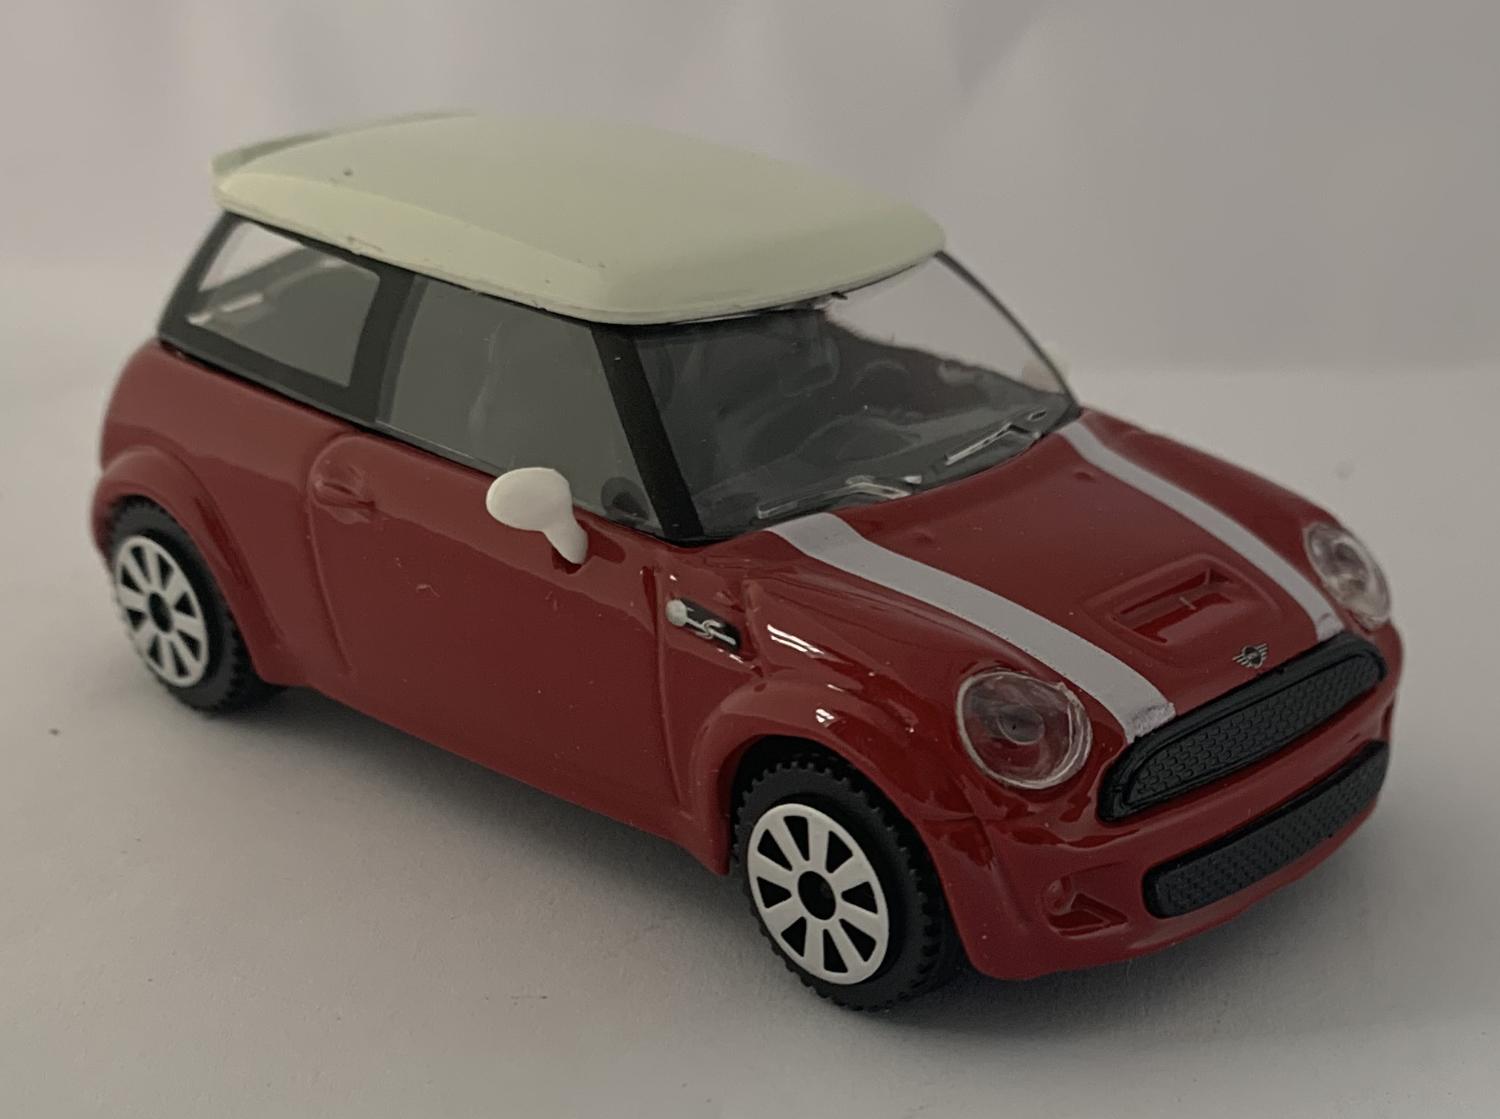 Mini Coopers S in red and white 1:43 scale model from Bburago, streetfire